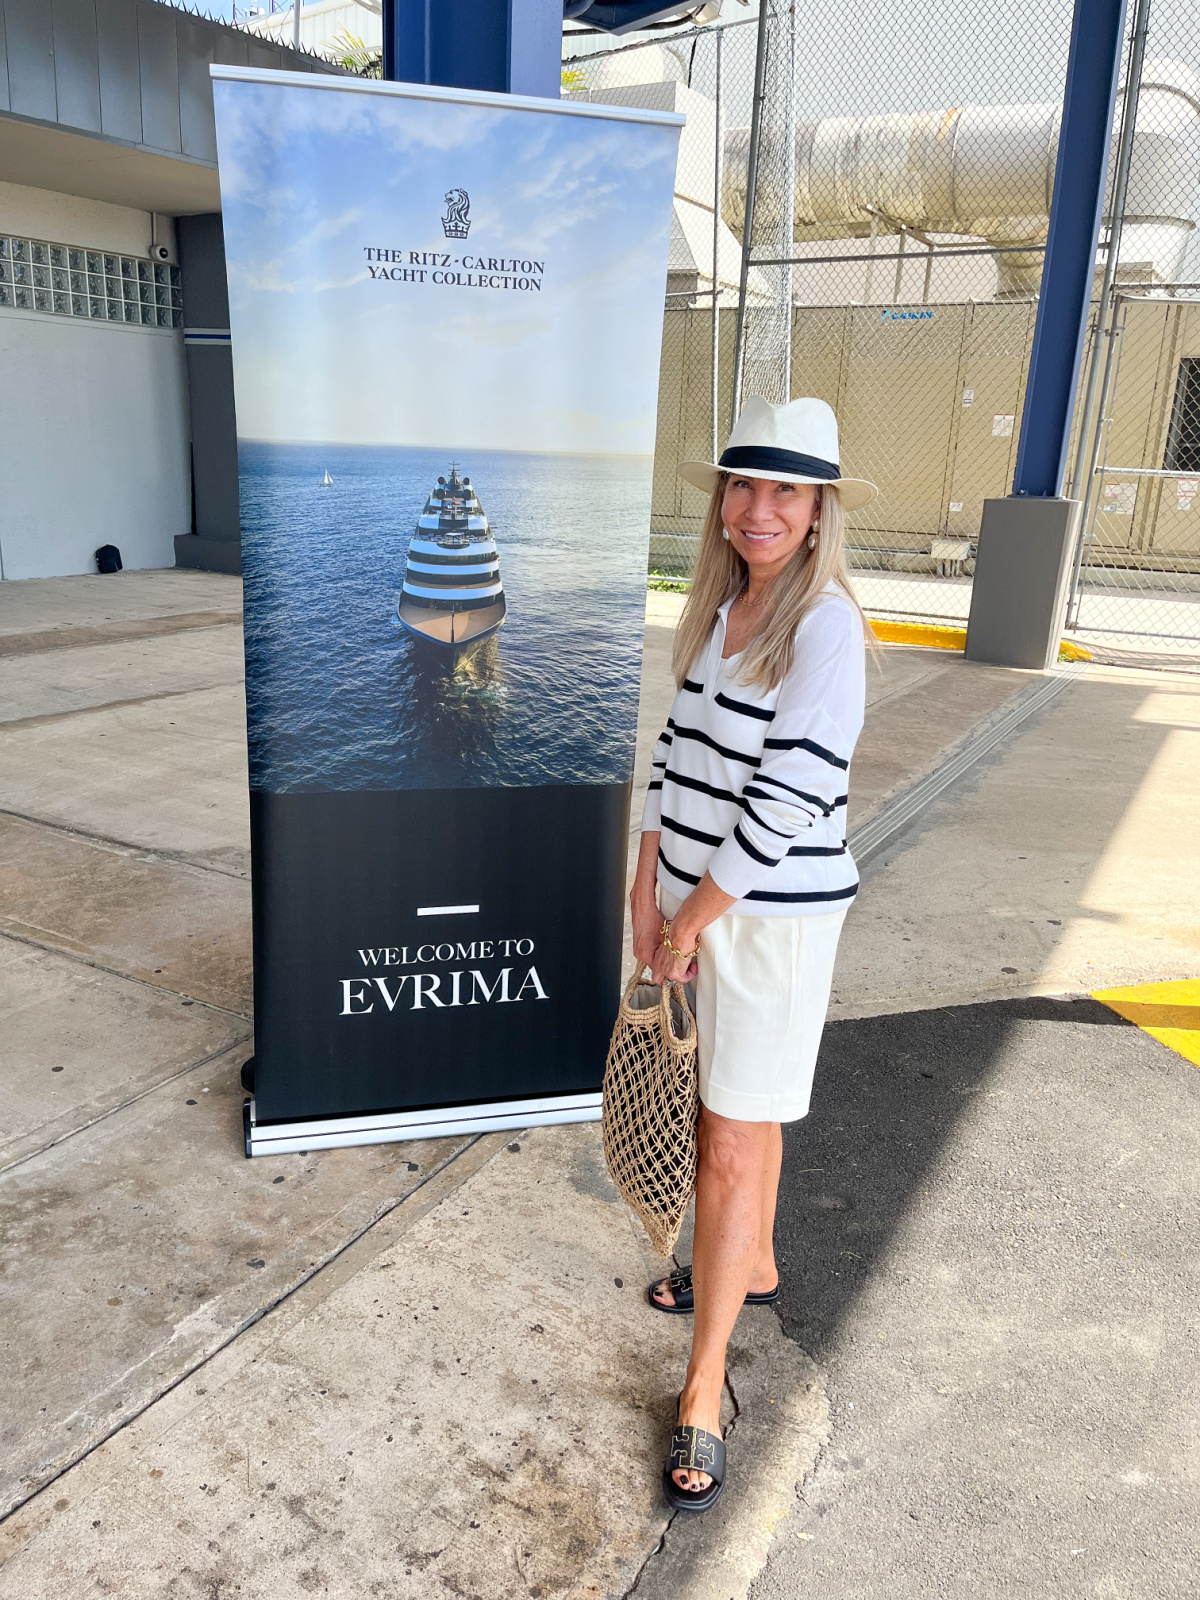 Woman about to board Ritz Carlton Yacht Collection cruise.